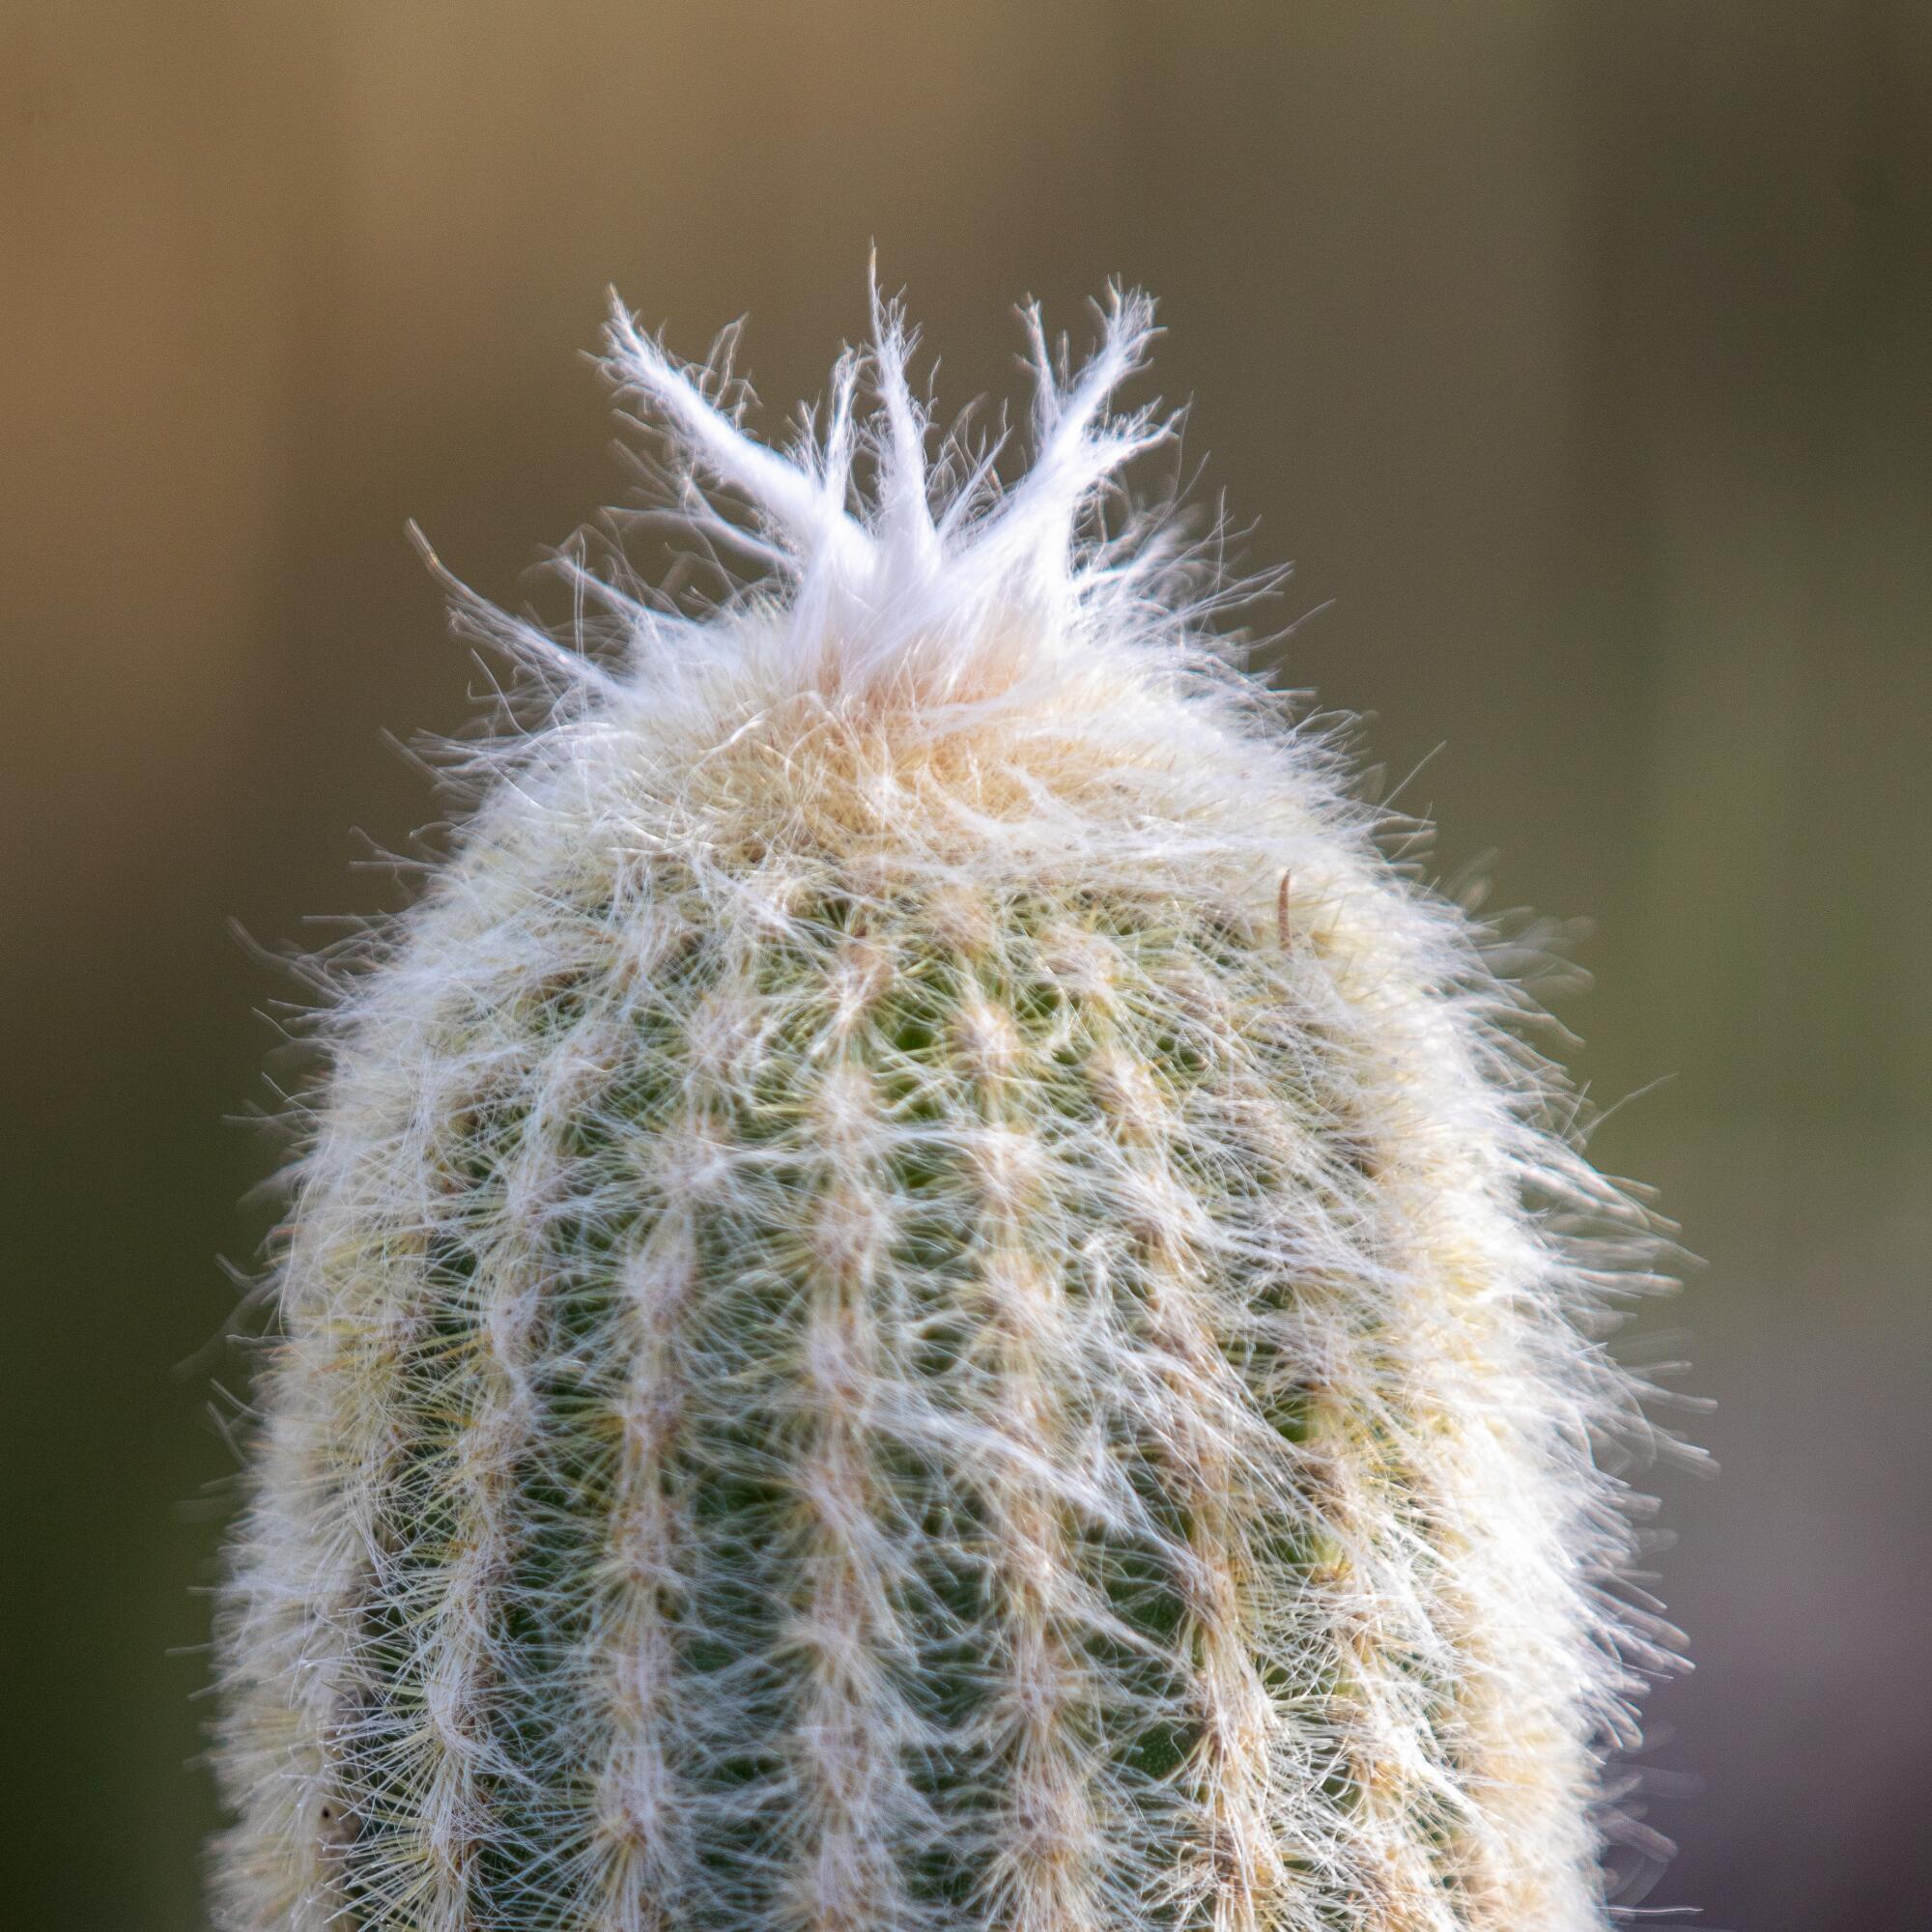 A rounded cactus covered with fuzzy-looking white spines.